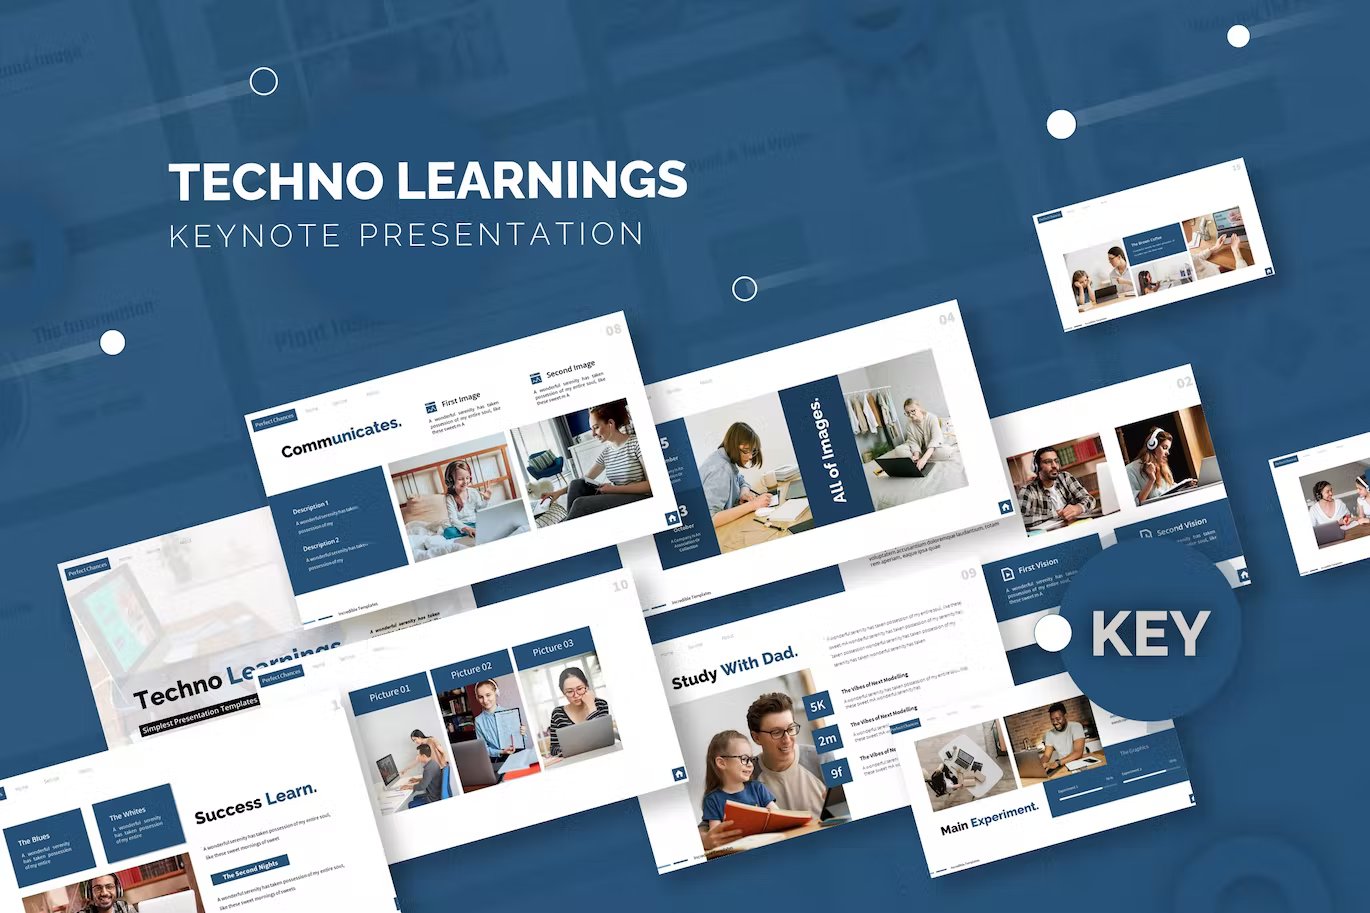 White lettering "Techno Learnings Keynote Presentation" and different presentation templates on a blue background.